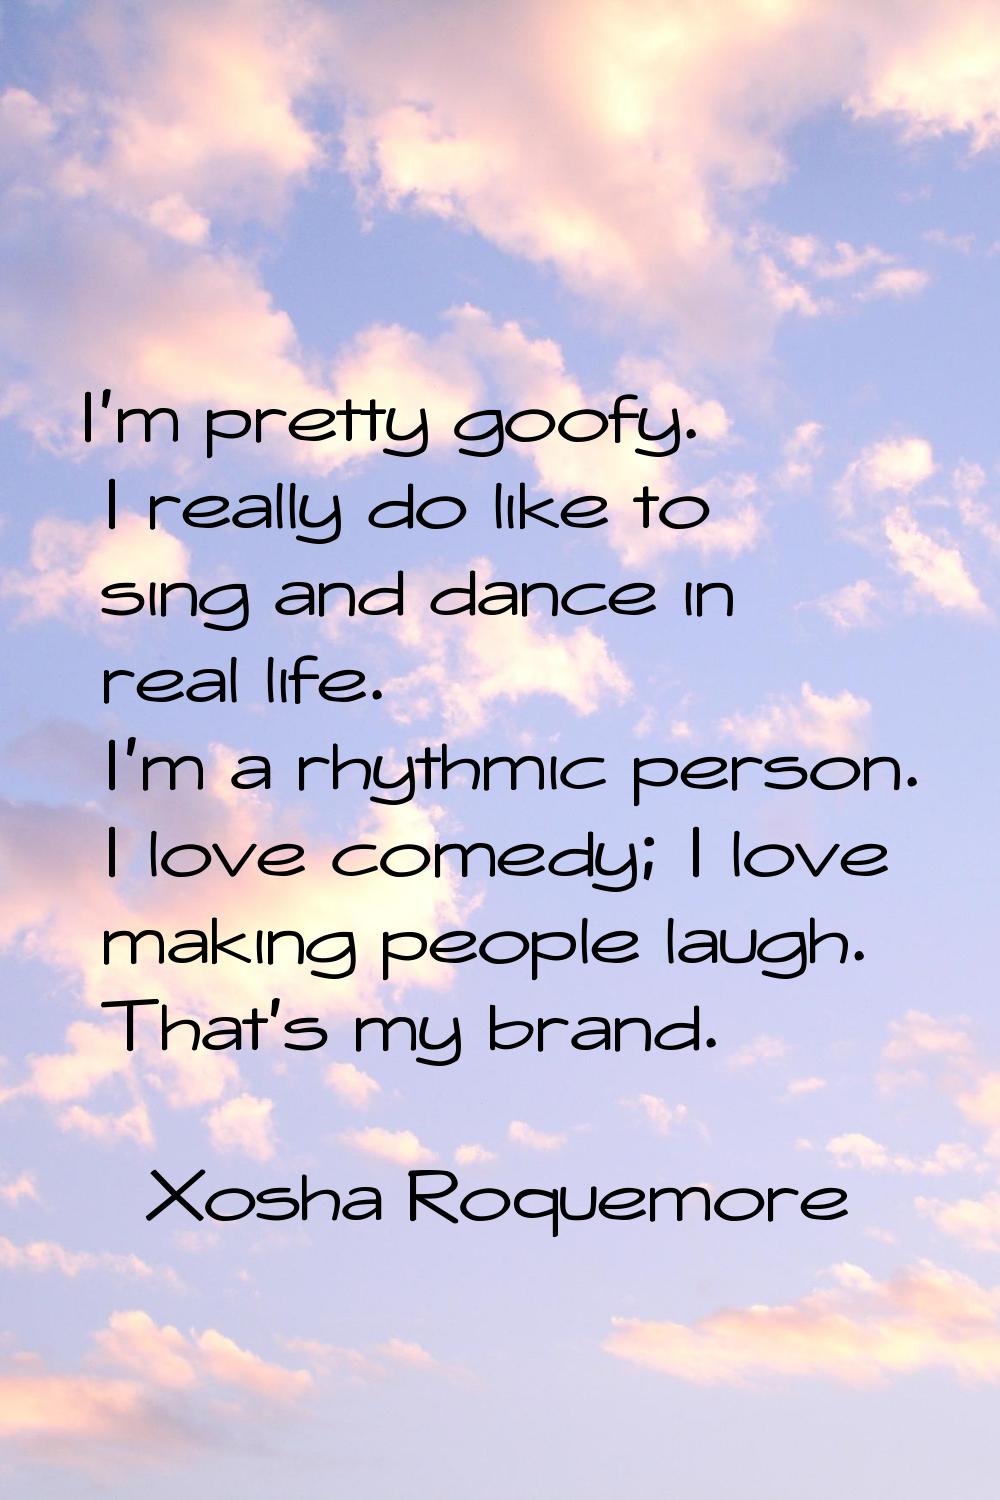 I'm pretty goofy. I really do like to sing and dance in real life. I'm a rhythmic person. I love co